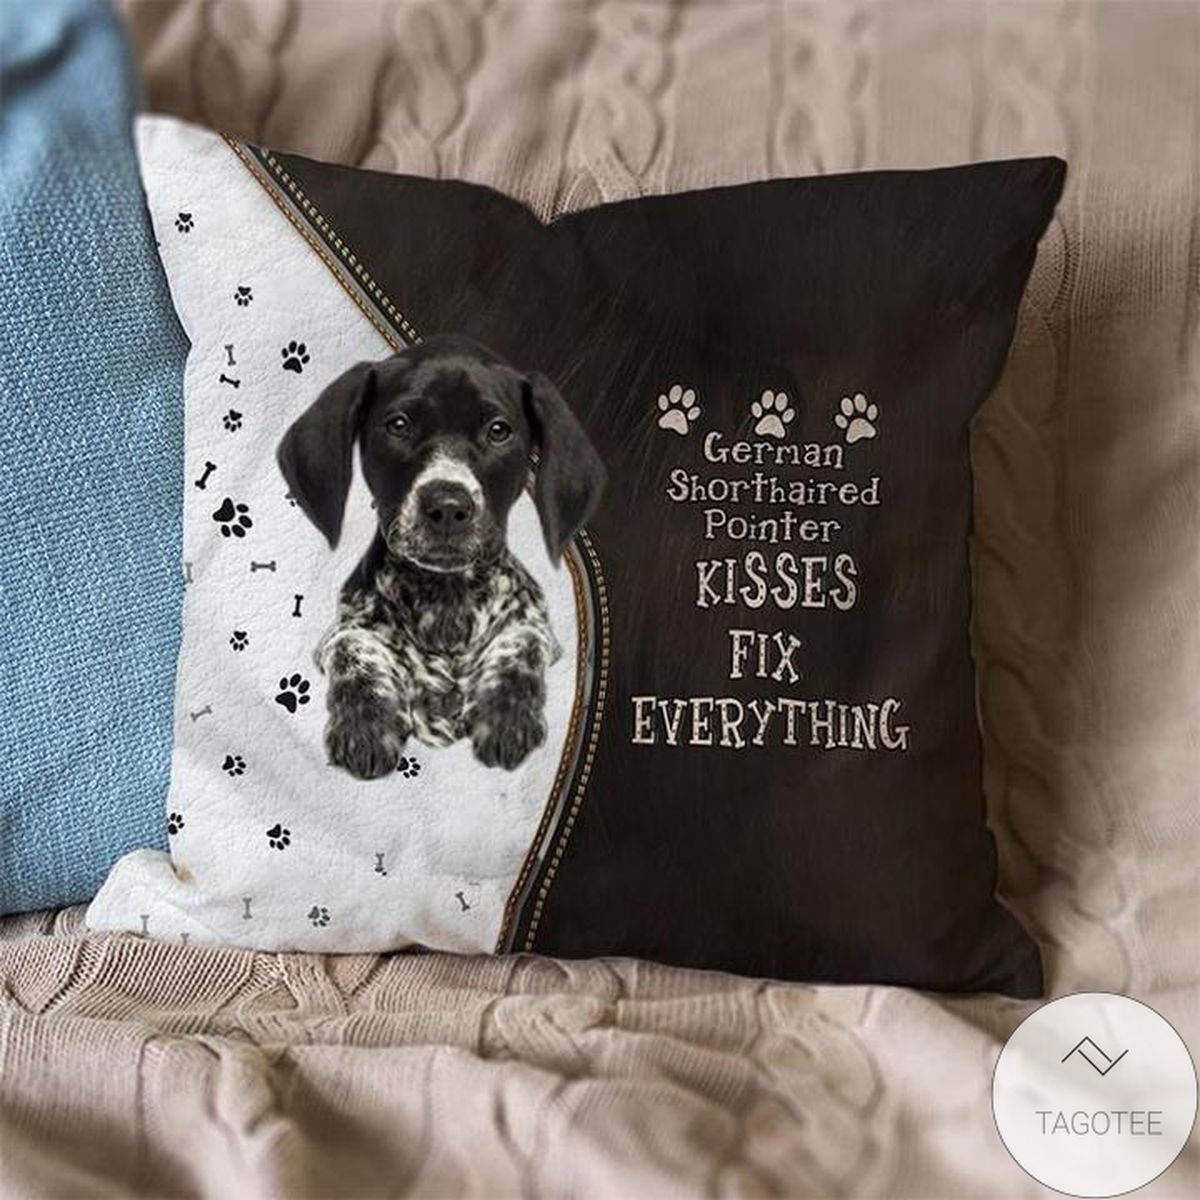 German Shorthaired Pointer Kisses Fix Everything Pillowcase